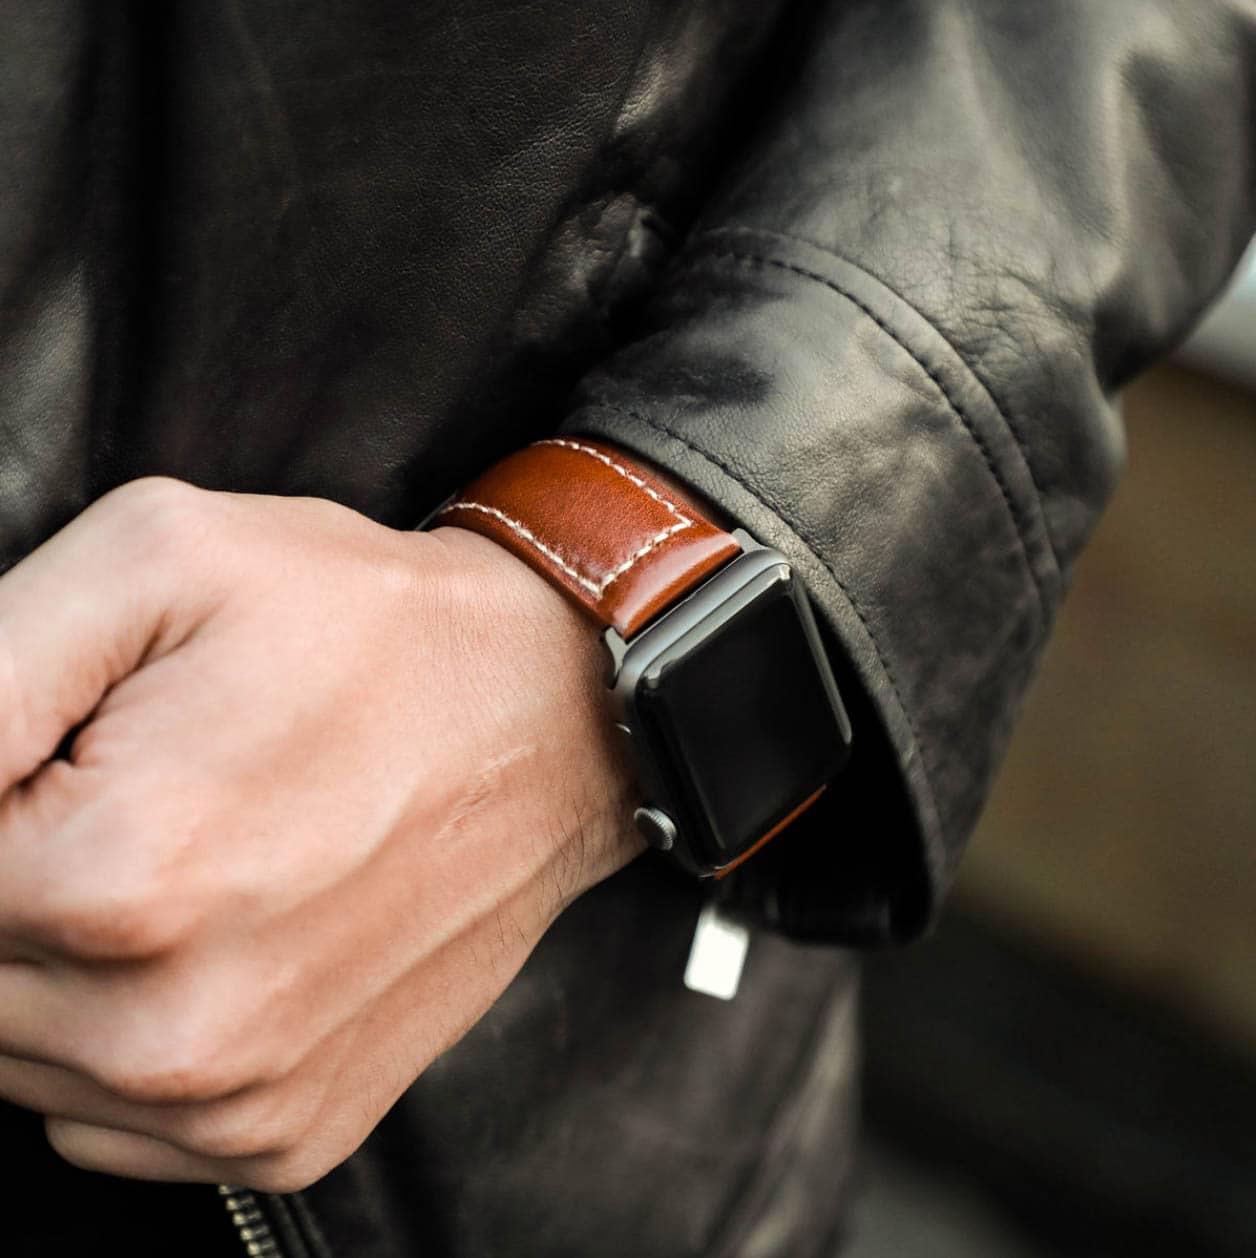 Rugged, beautiful Italian leather expertly crafted into an exceptional watch band worthy of your Series 4.